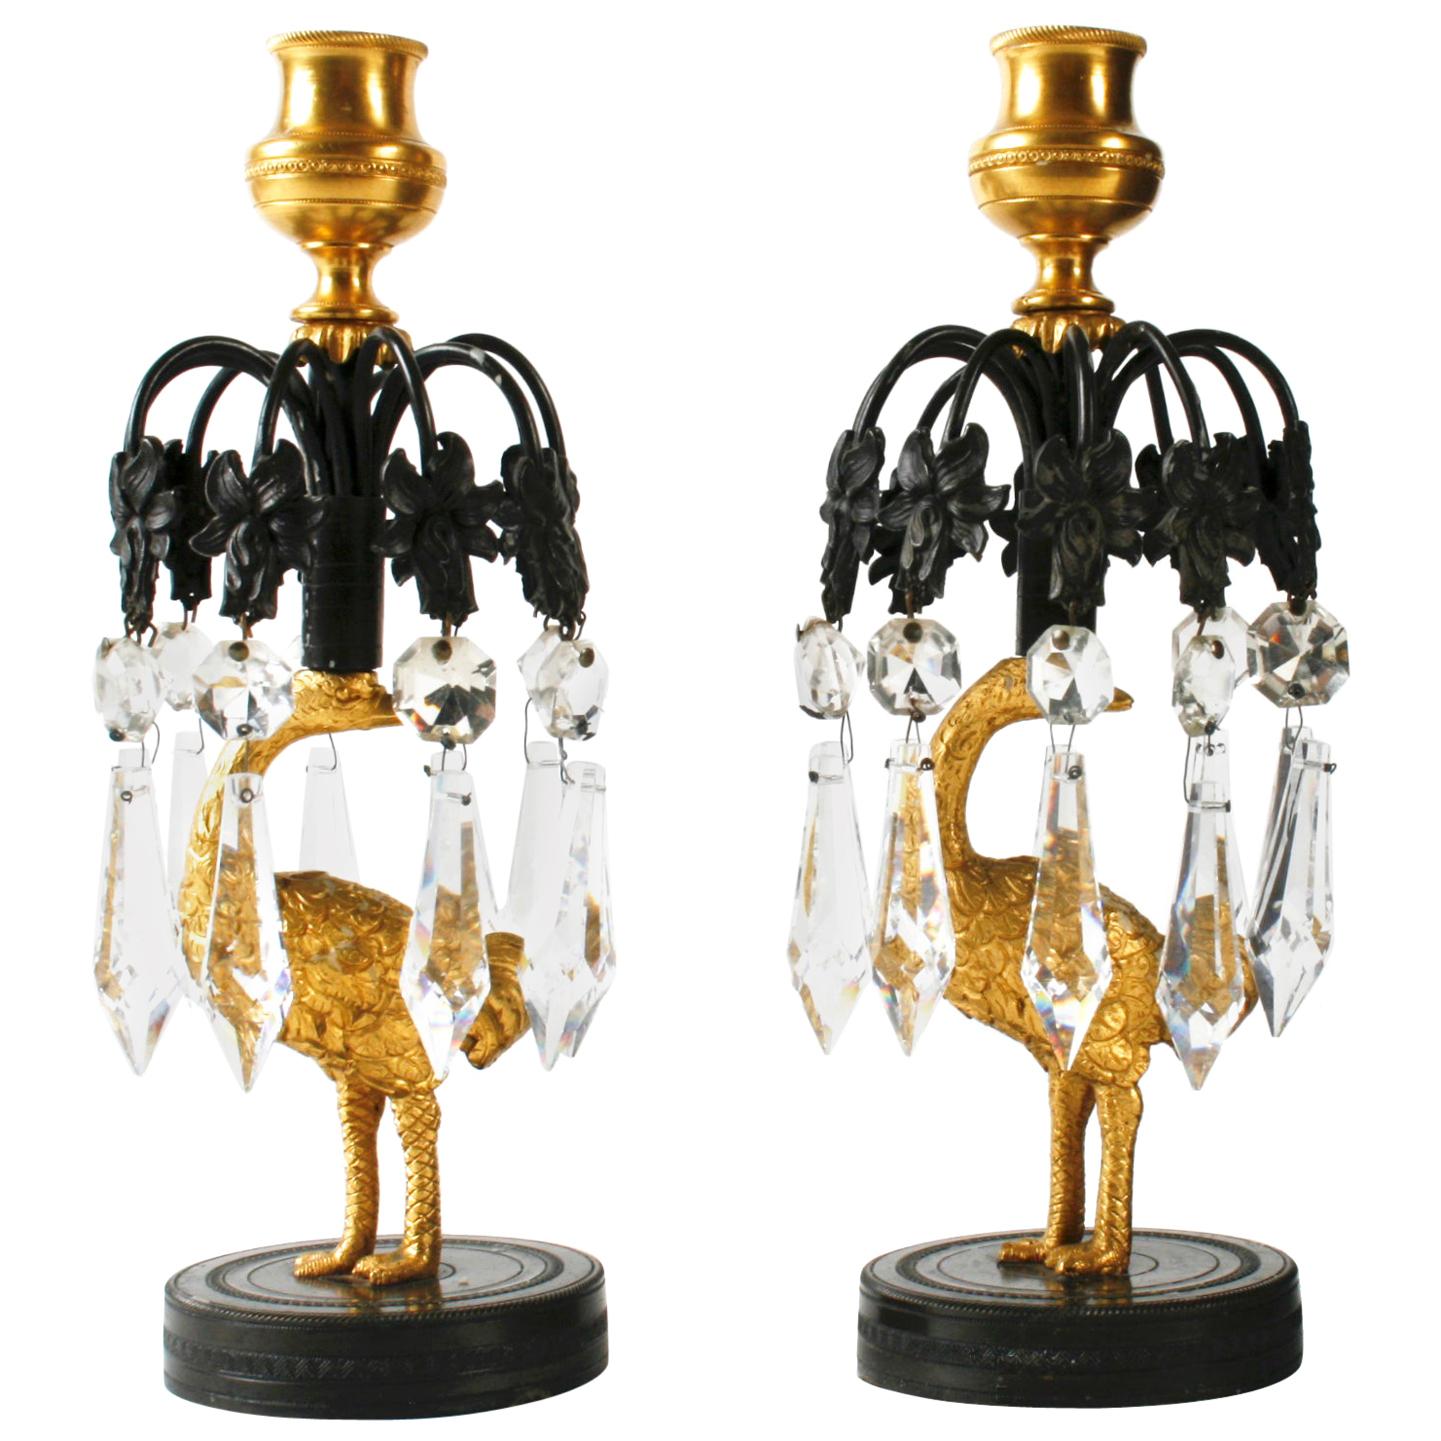 Pair of Regency Gilt and Patinated Bronze Ostrich Candlesticks, circa 1815 For Sale